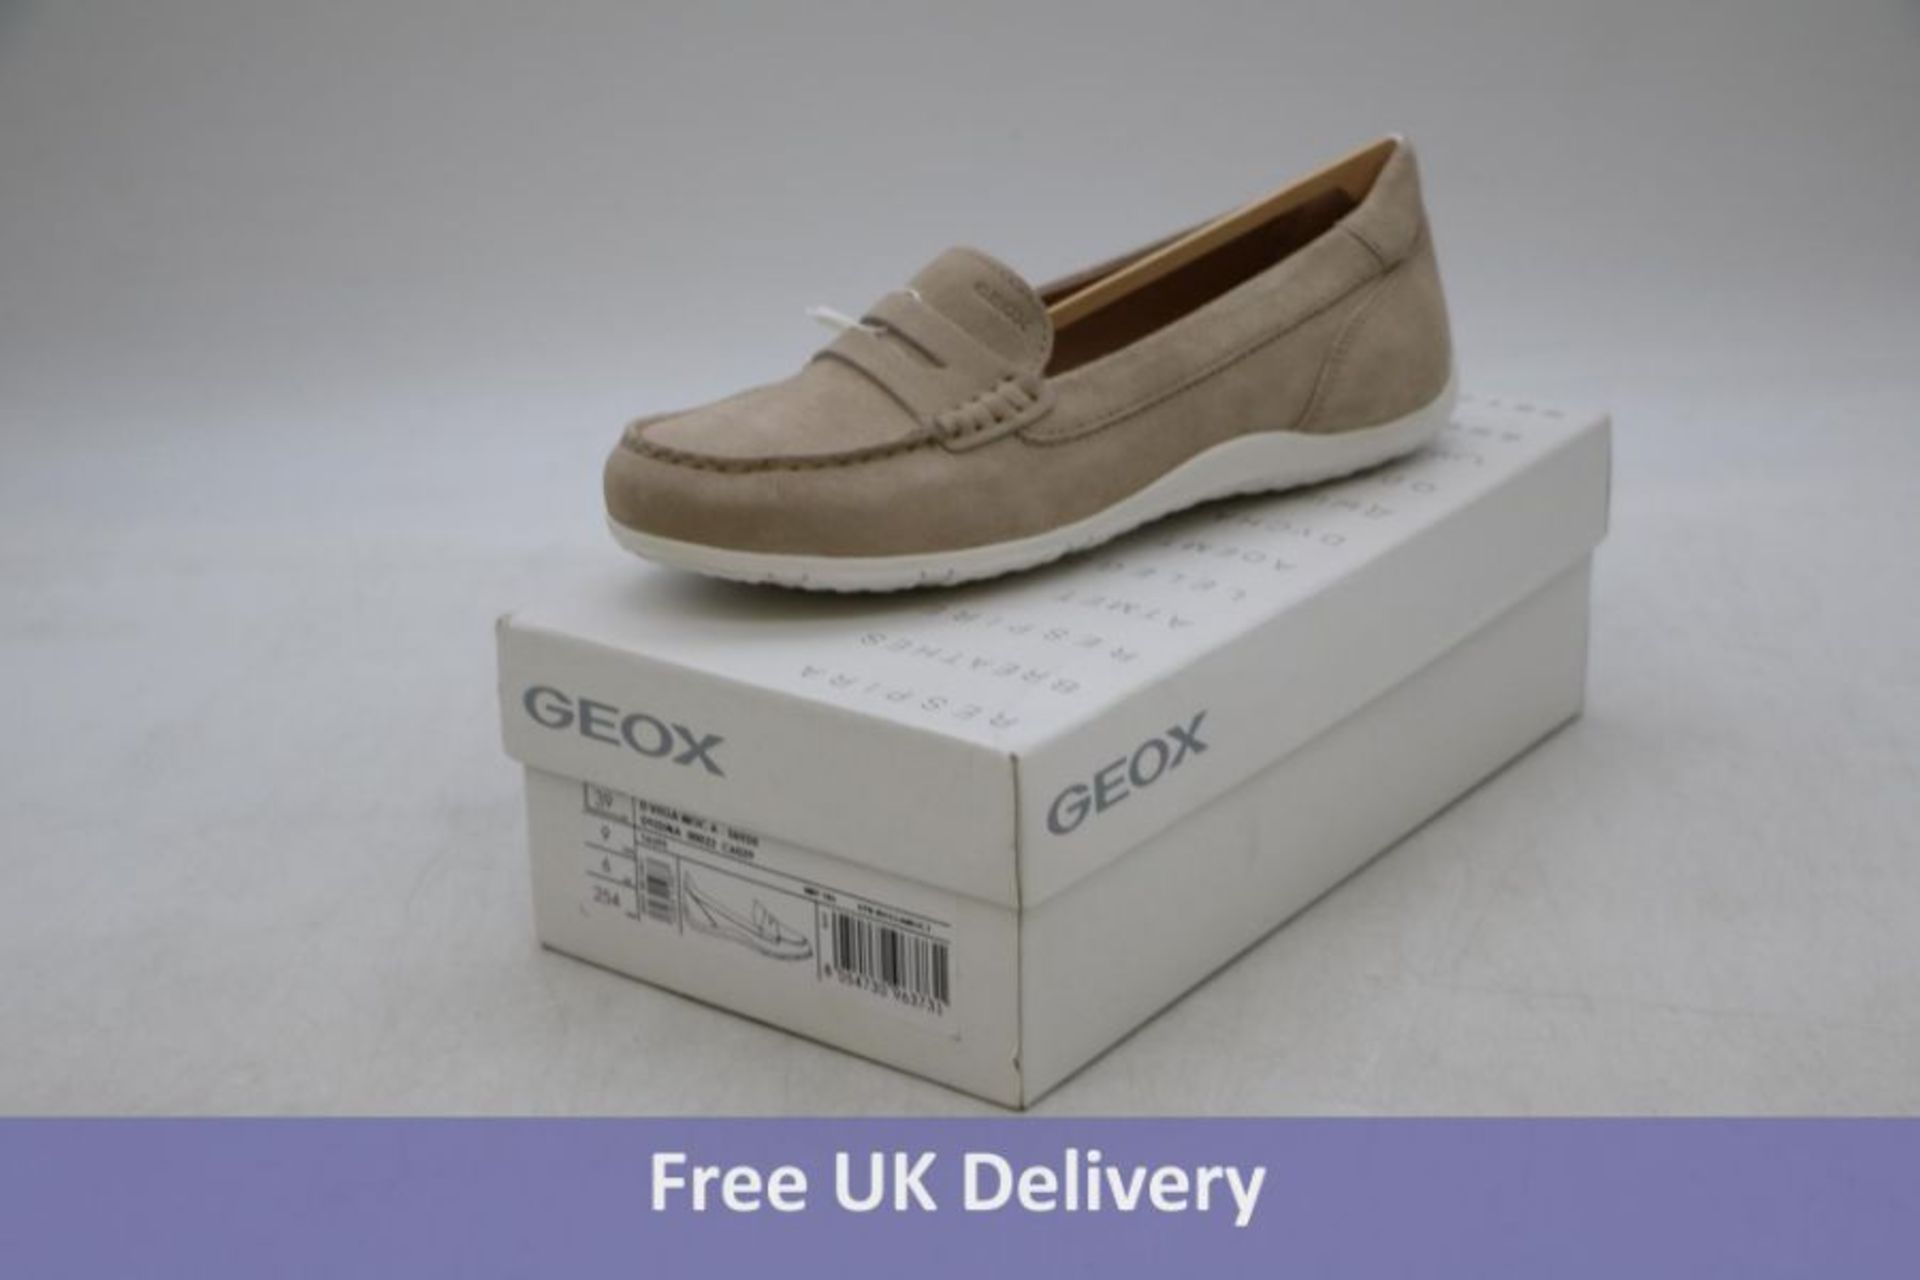 Four pairs of Geox Women's Shoes to include 1x Bigliana Croc Leather Shoes, Black, UK 5, 1x Bigliana - Image 4 of 4